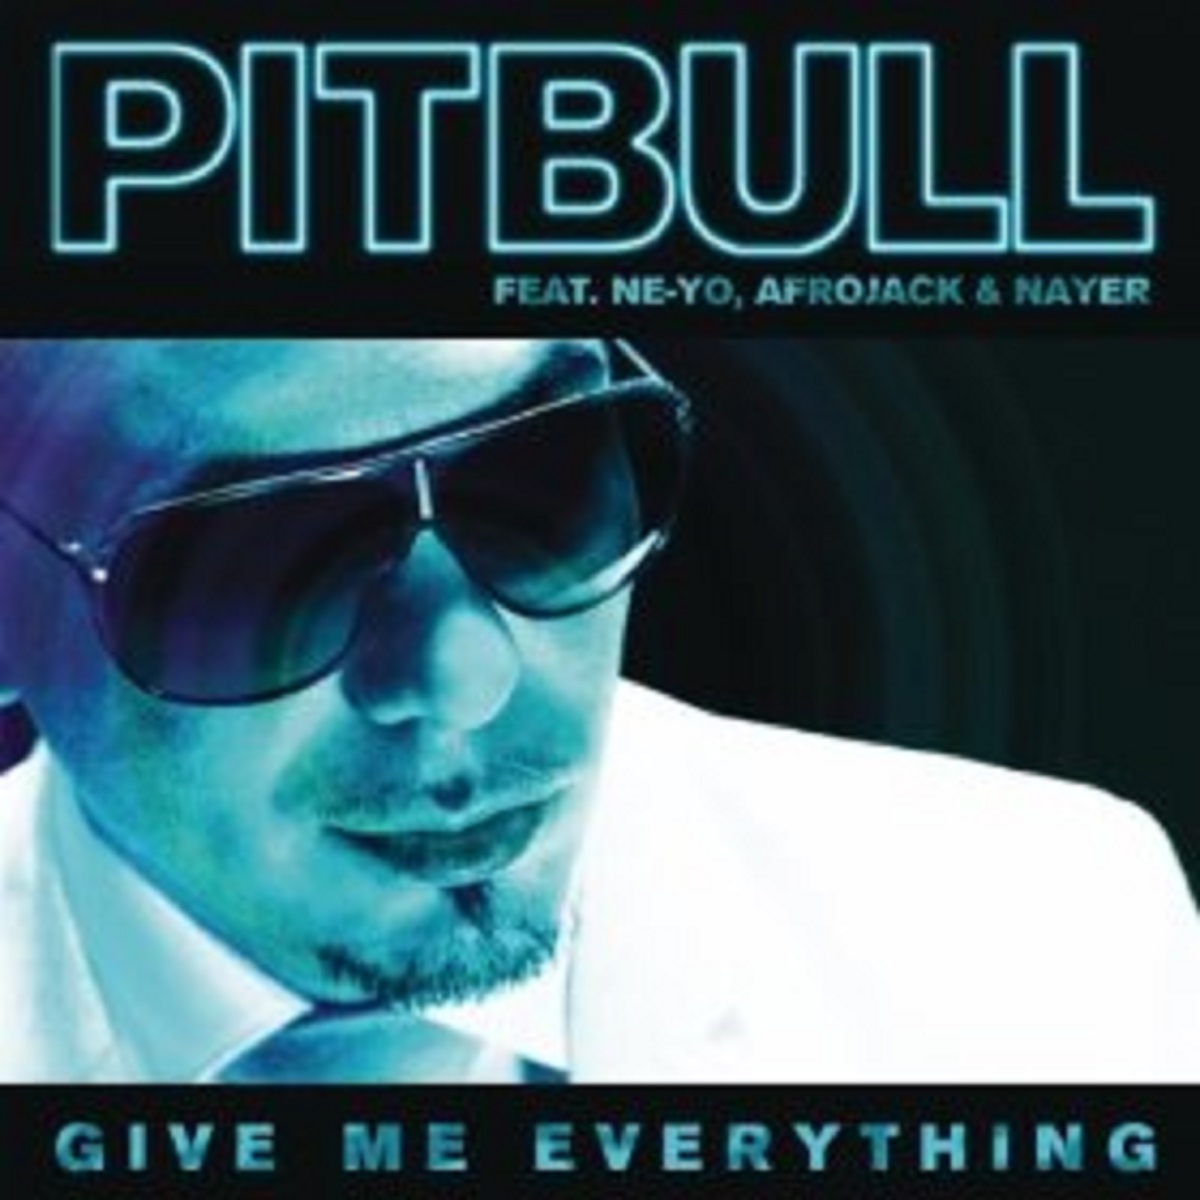 Pitbull - Give Me Everything Tonight Mp3 Ringtone Download